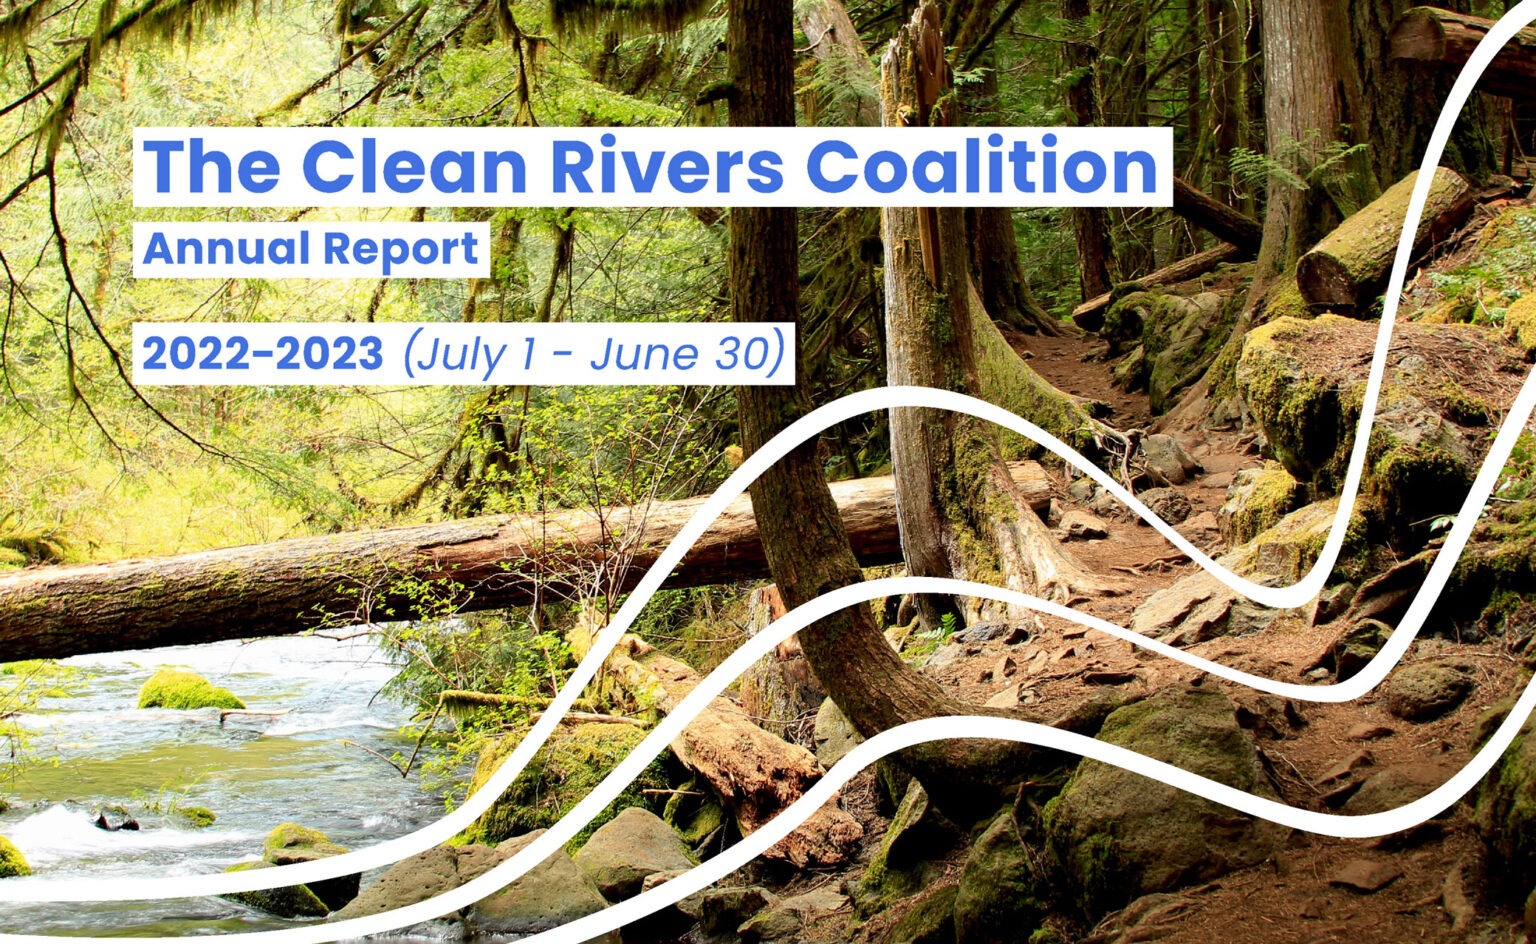 Follow-the-Water-annual-report-clean-rivers-coalition-2022-2023_Page_01